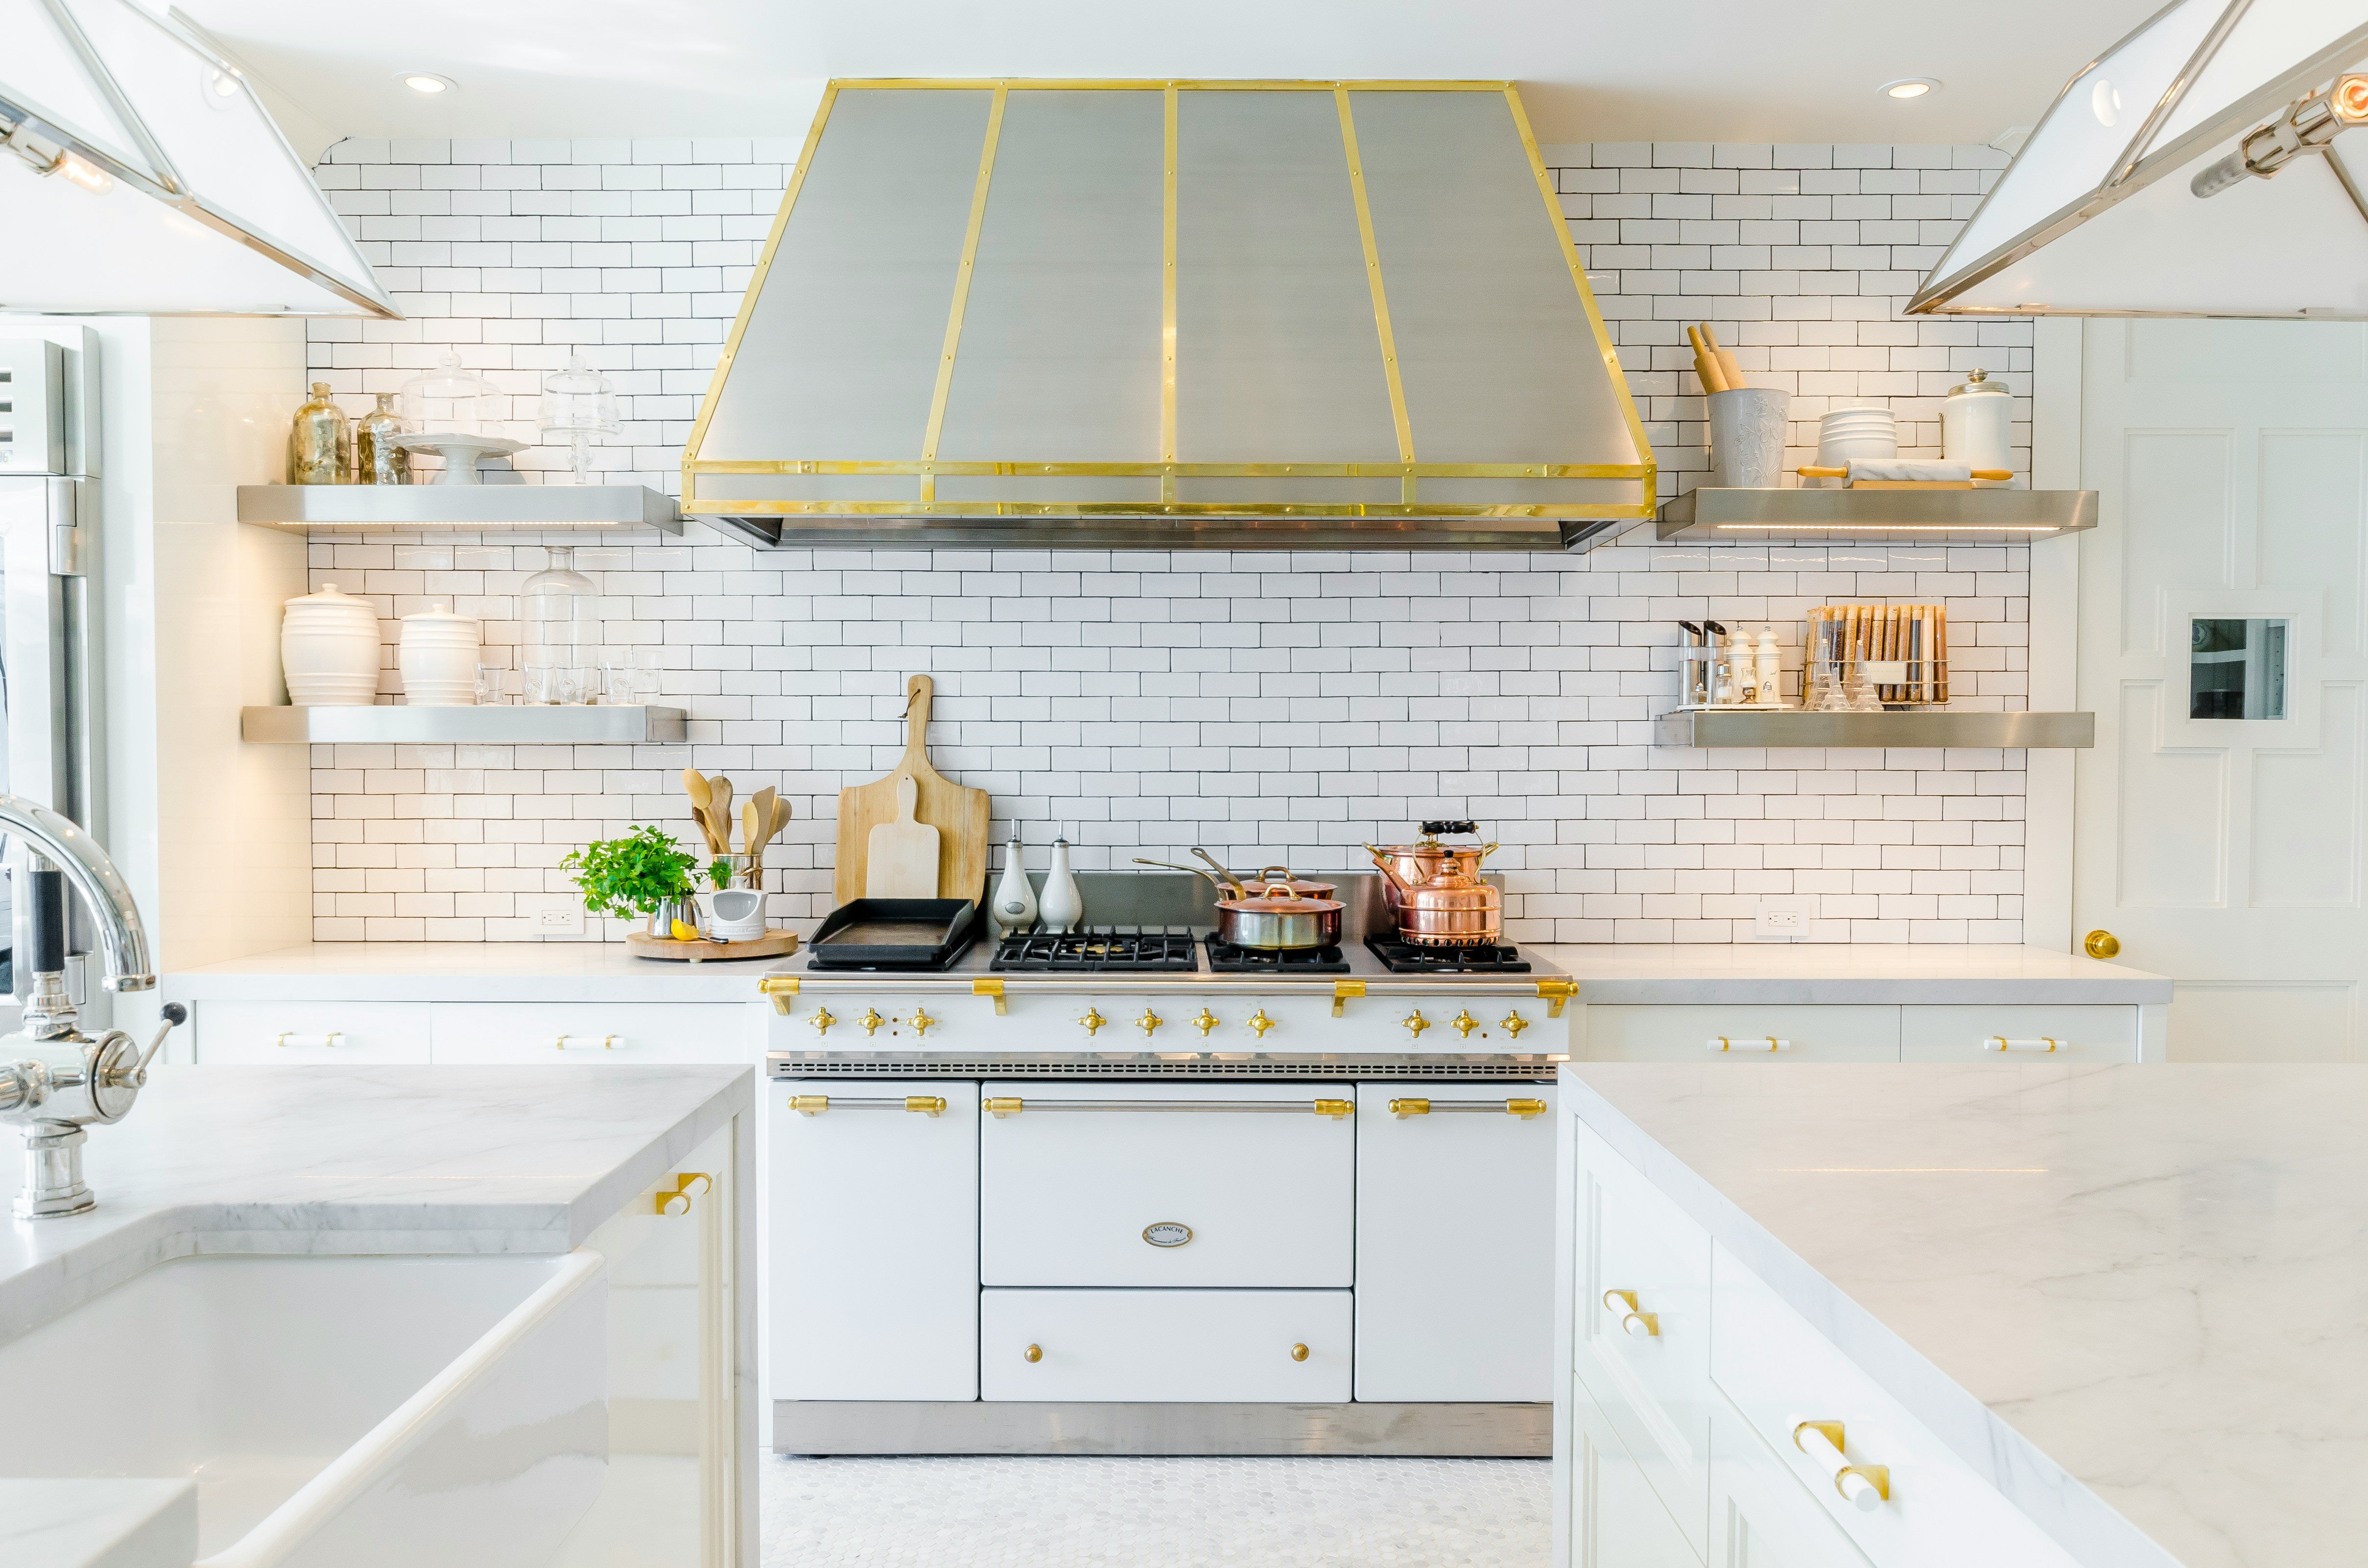 6 Things to Consider When Planning a Kitchen Renovation